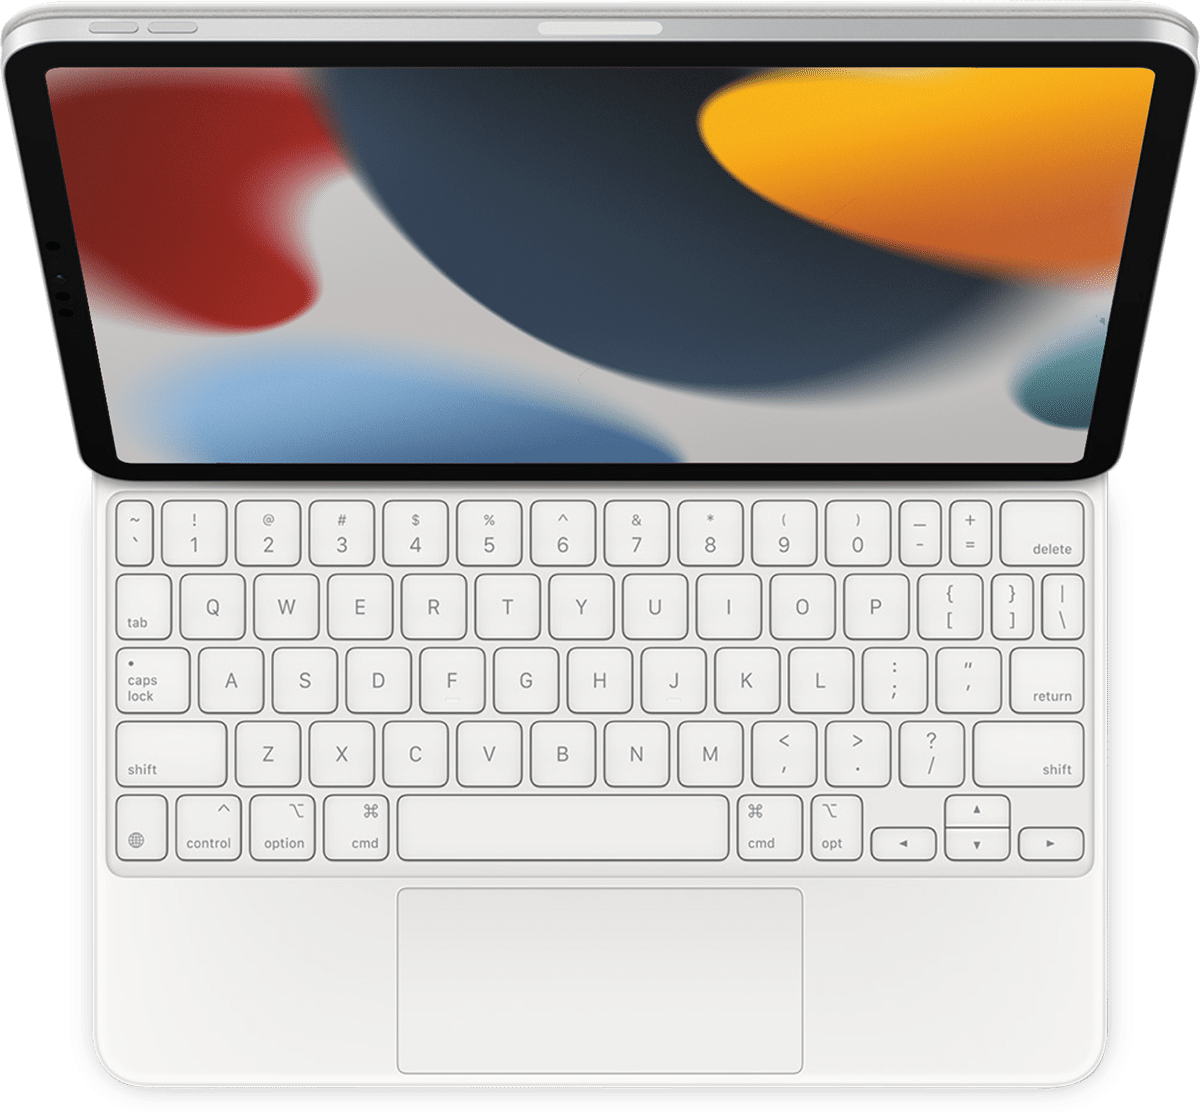 Set up and use Magic Keyboard for iPad - Apple Support